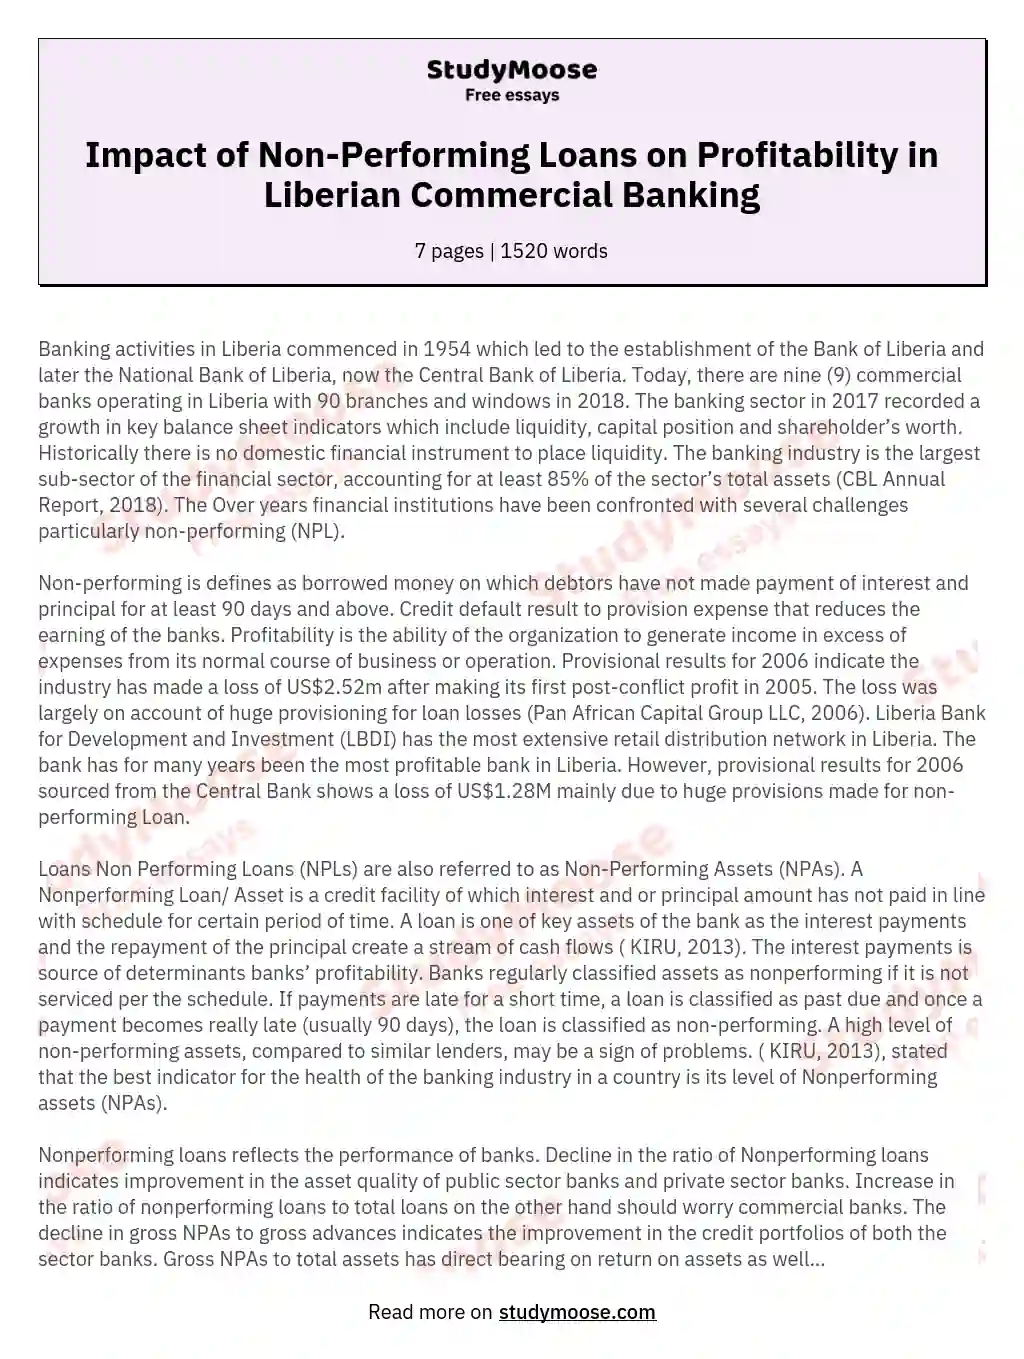 Impact of Non-Performing Loans on Profitability in Liberian Commercial Banking essay